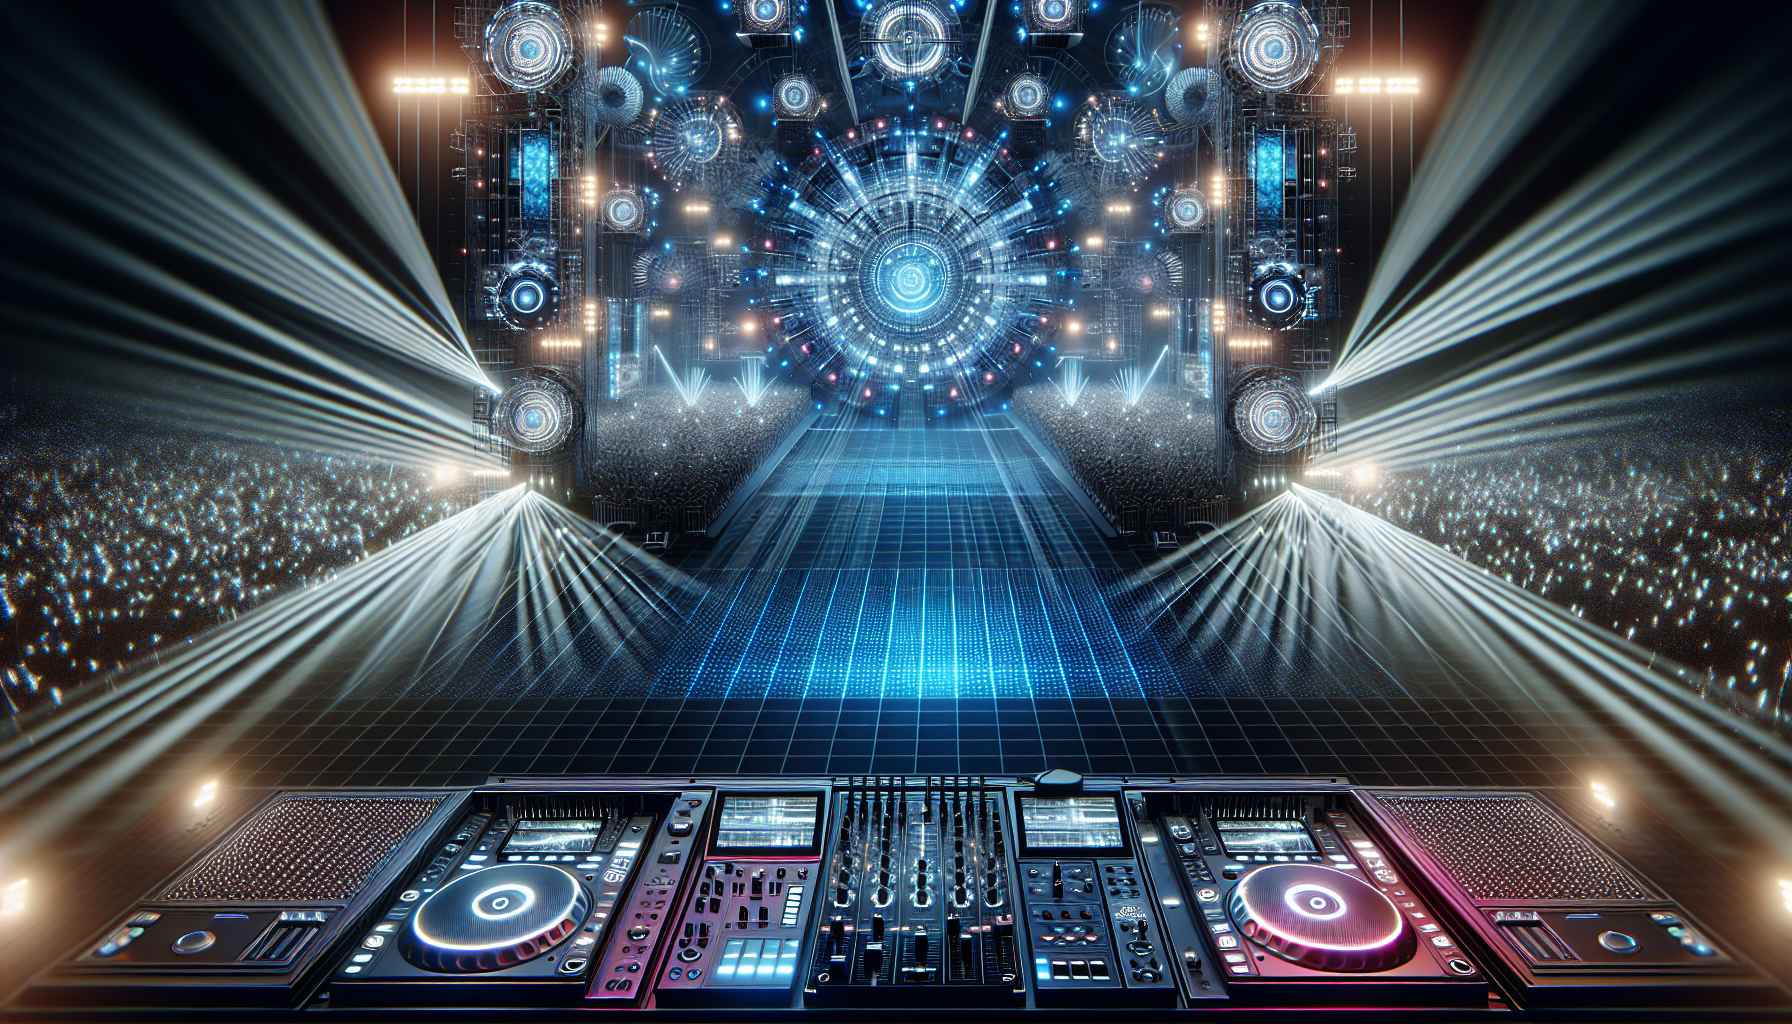 The beat goes on: how technology shapes the way we experience electronic dance music